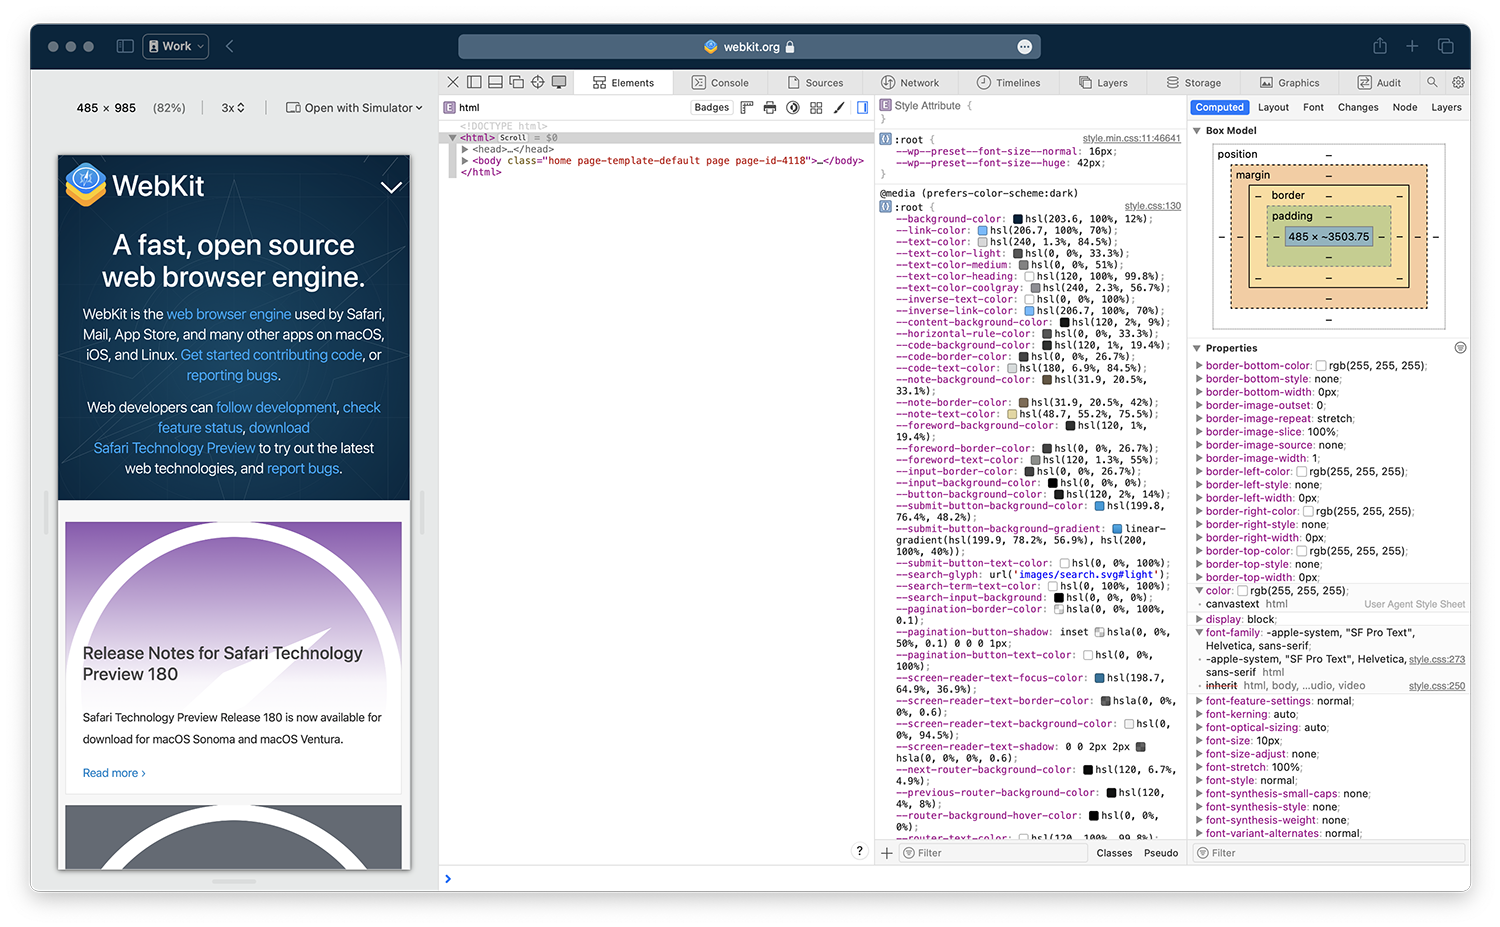 Screenshot of webkit.org in Responsive Design Mode with Web Inspector docked to the right side of the window